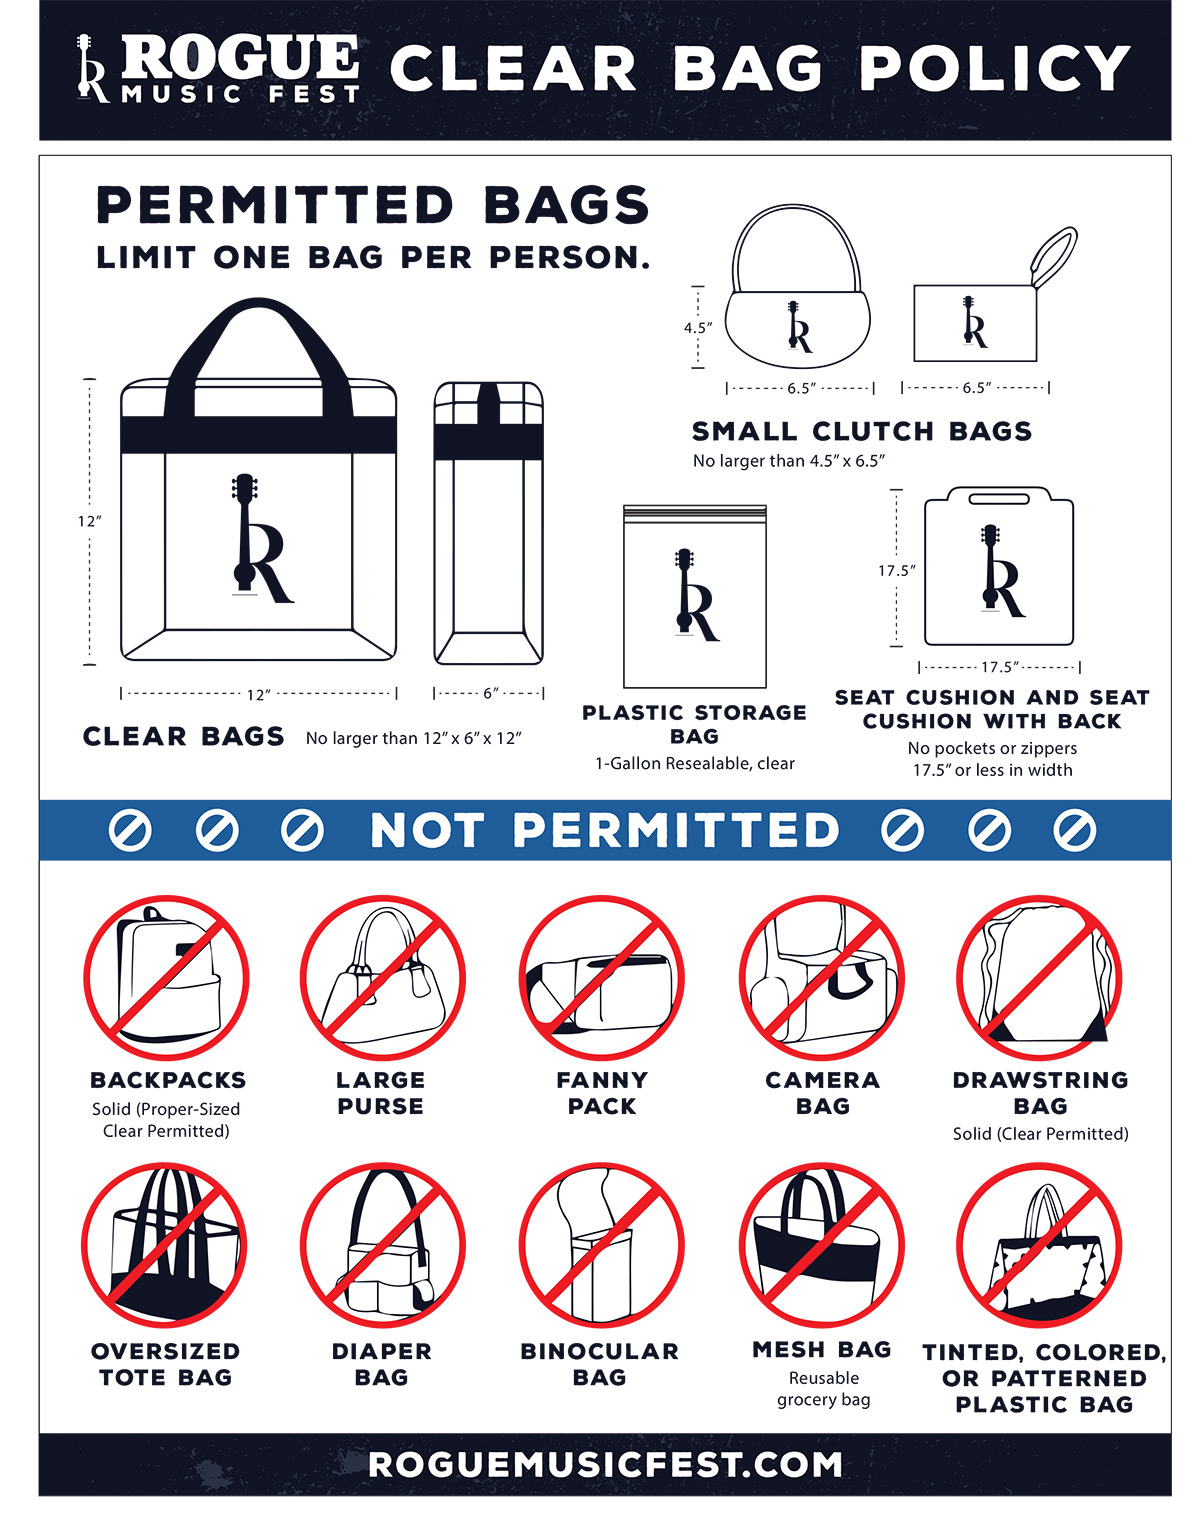 RMF Clear Bag Policy